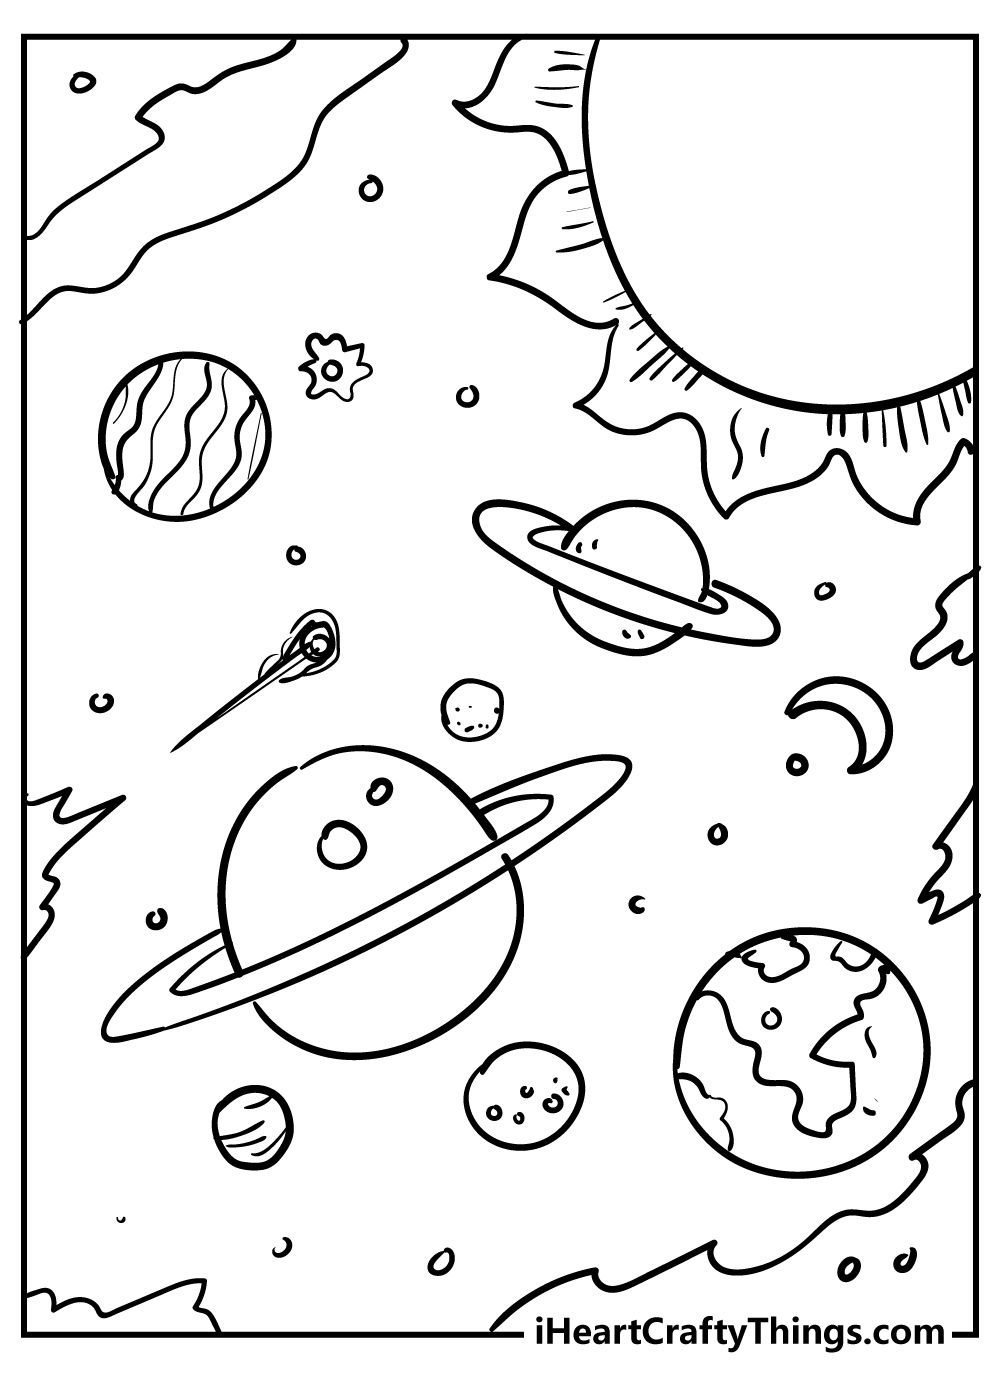 Outer space coloring pages space coloring pages planet coloring pages easy coloring pages